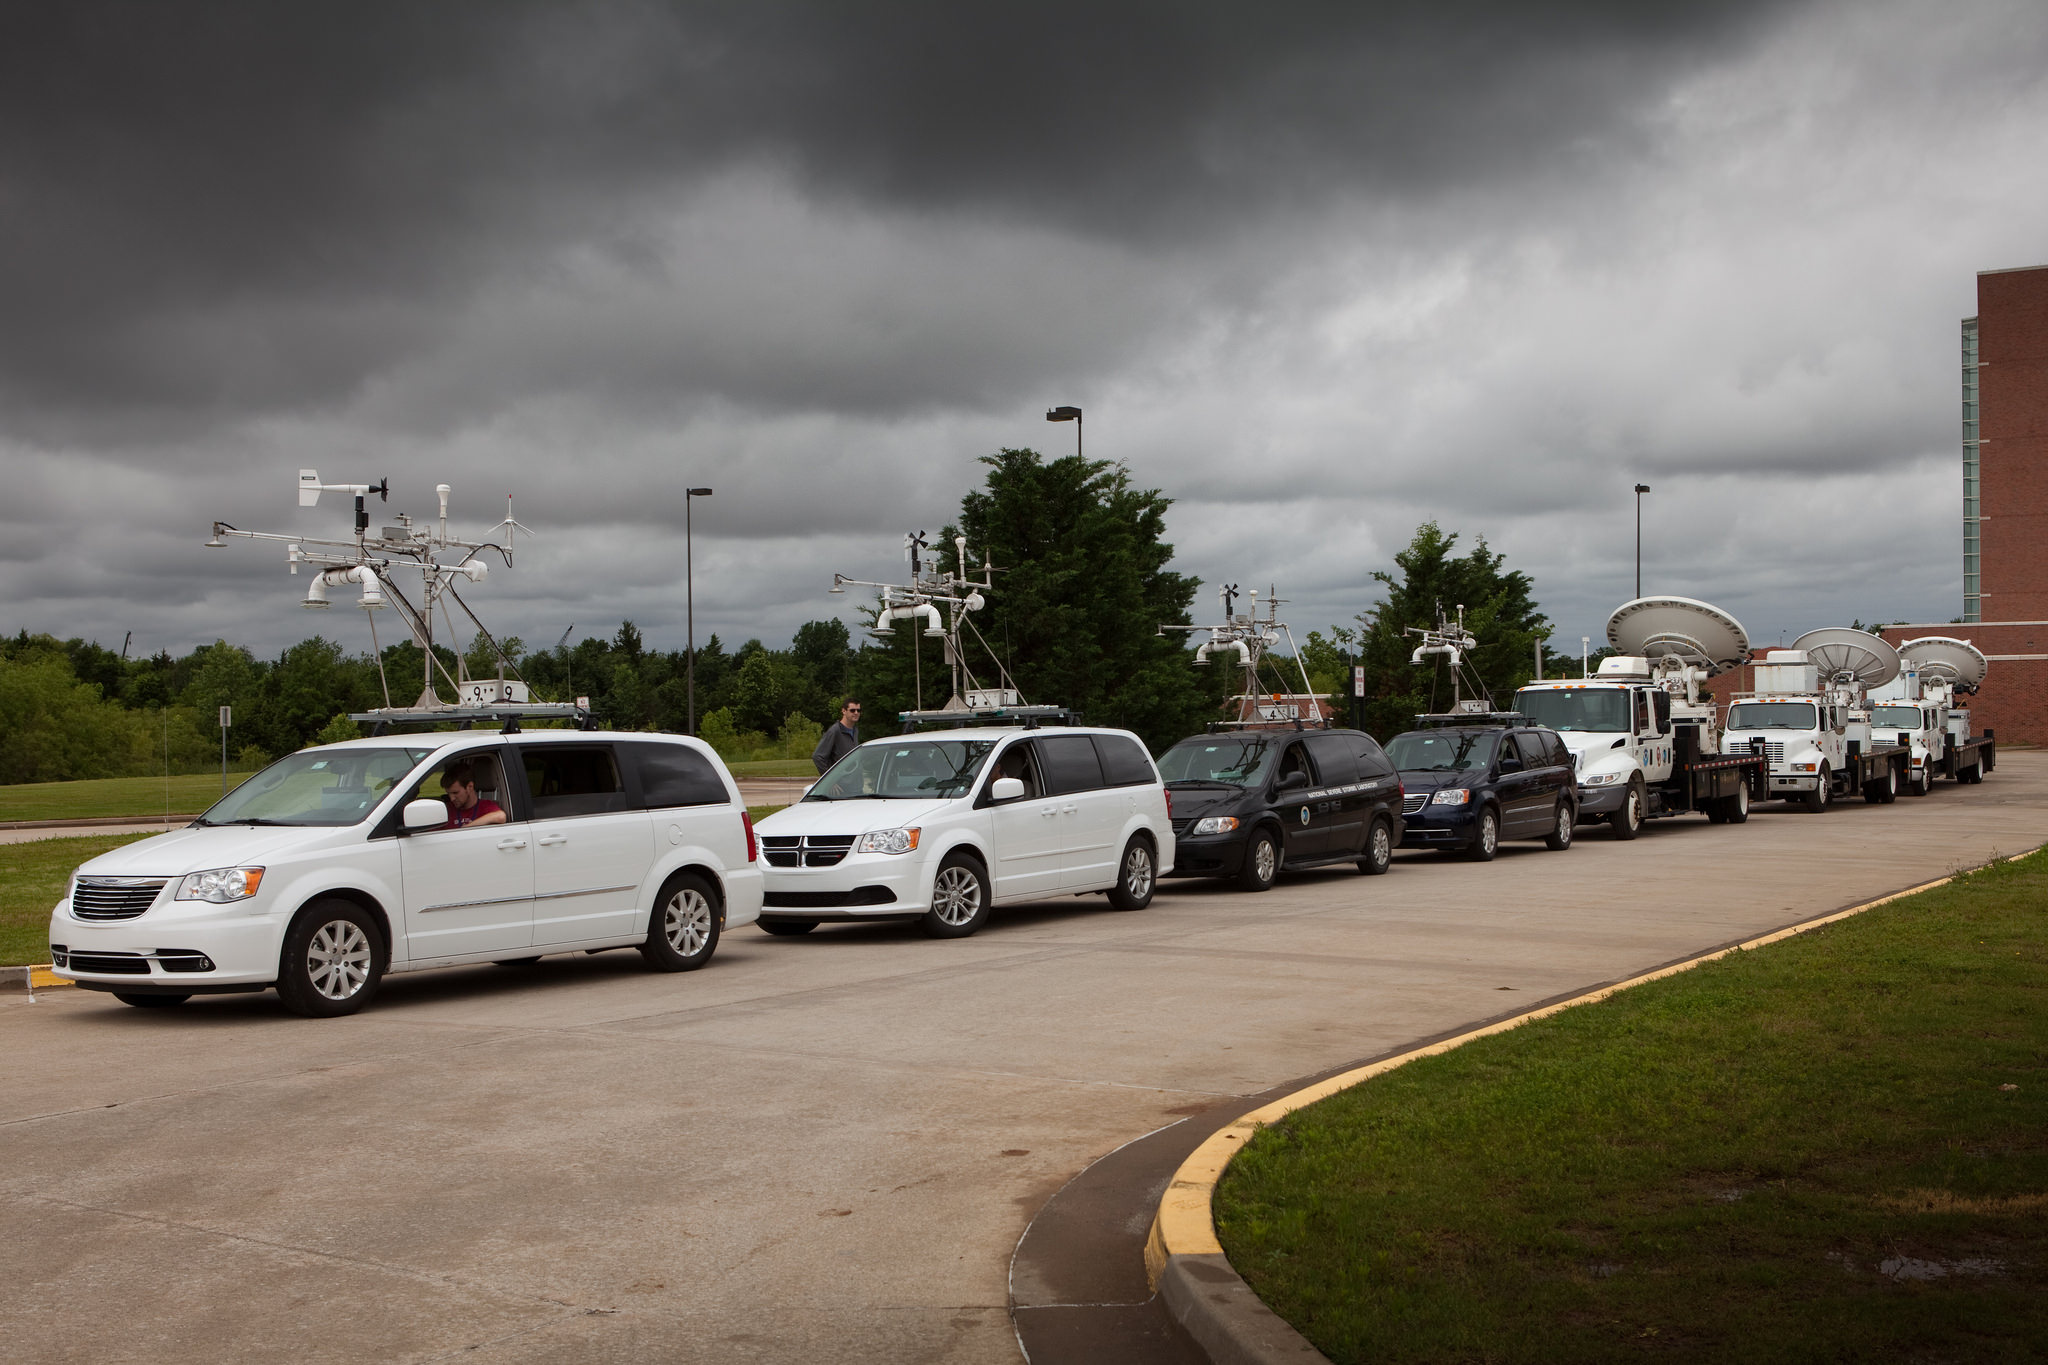 Mobile Mesonets, and other vehicles utilized in PECAN, are seen at the National Weather Center before leaving for the project.